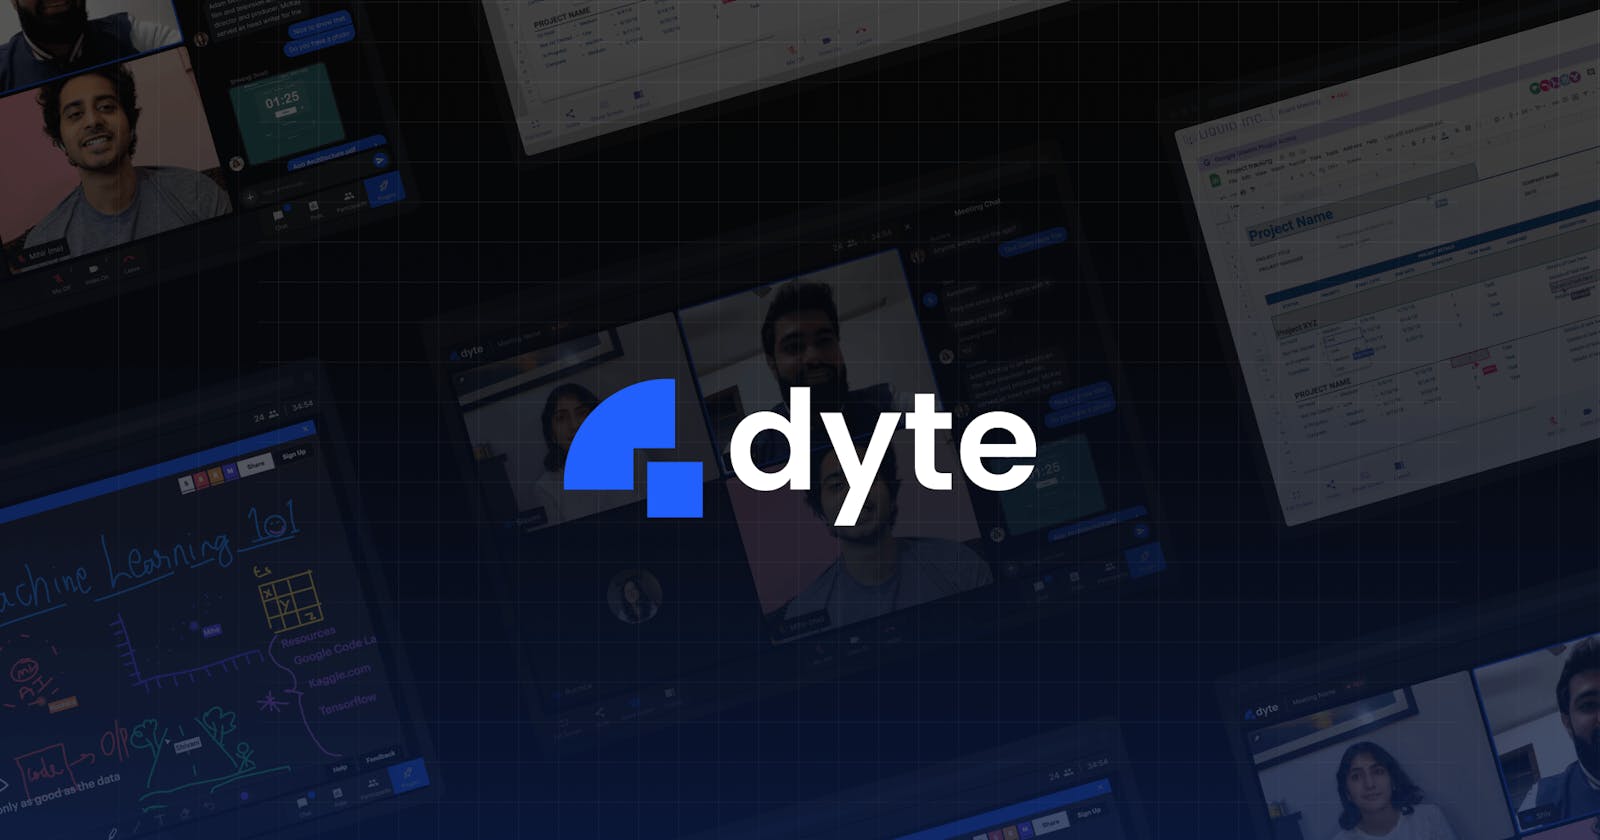 Live video calling - the Dyte way